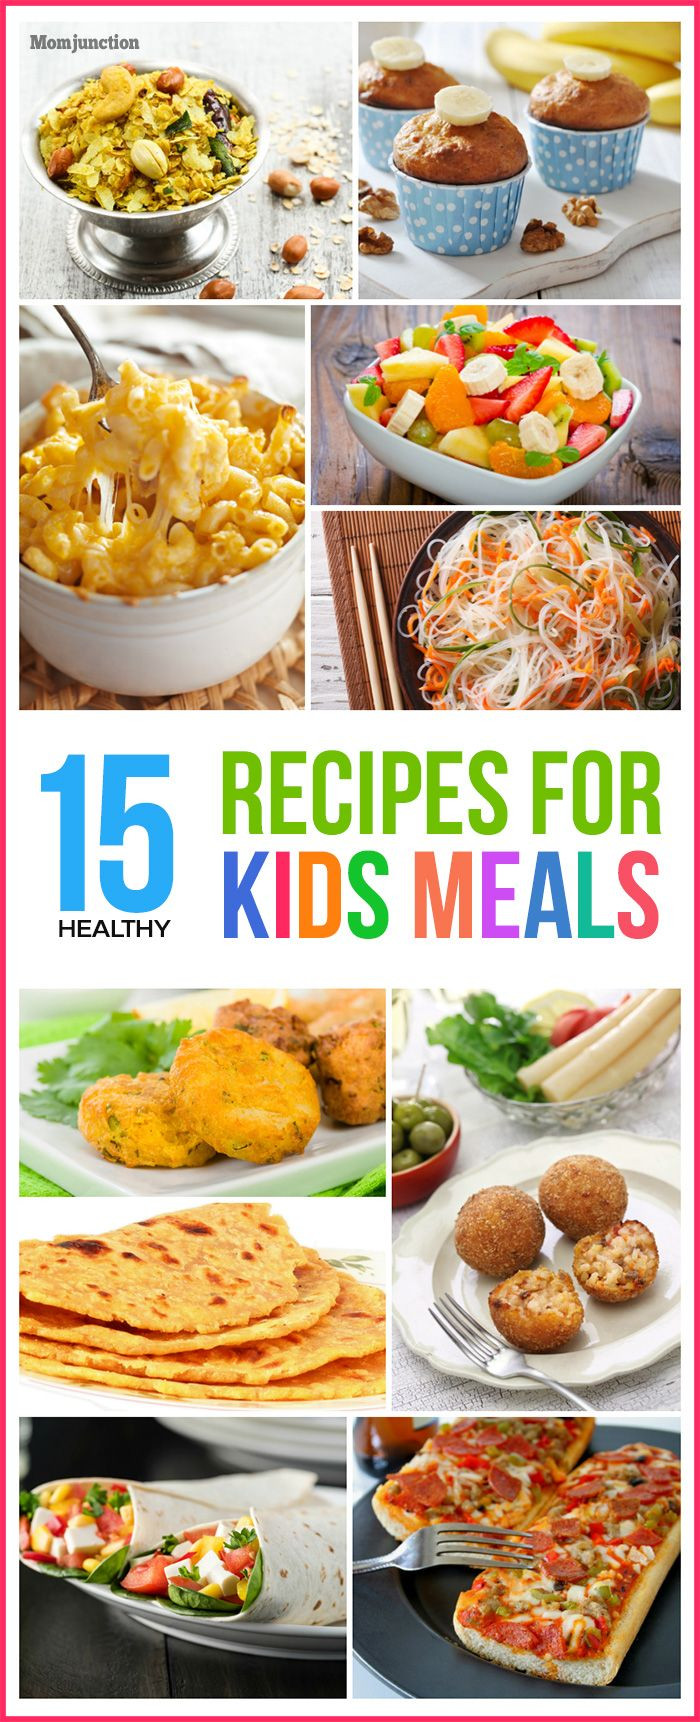 Fun Healthy Dinners For Kids
 Top 15 Healthy Recipes For Kids Meals